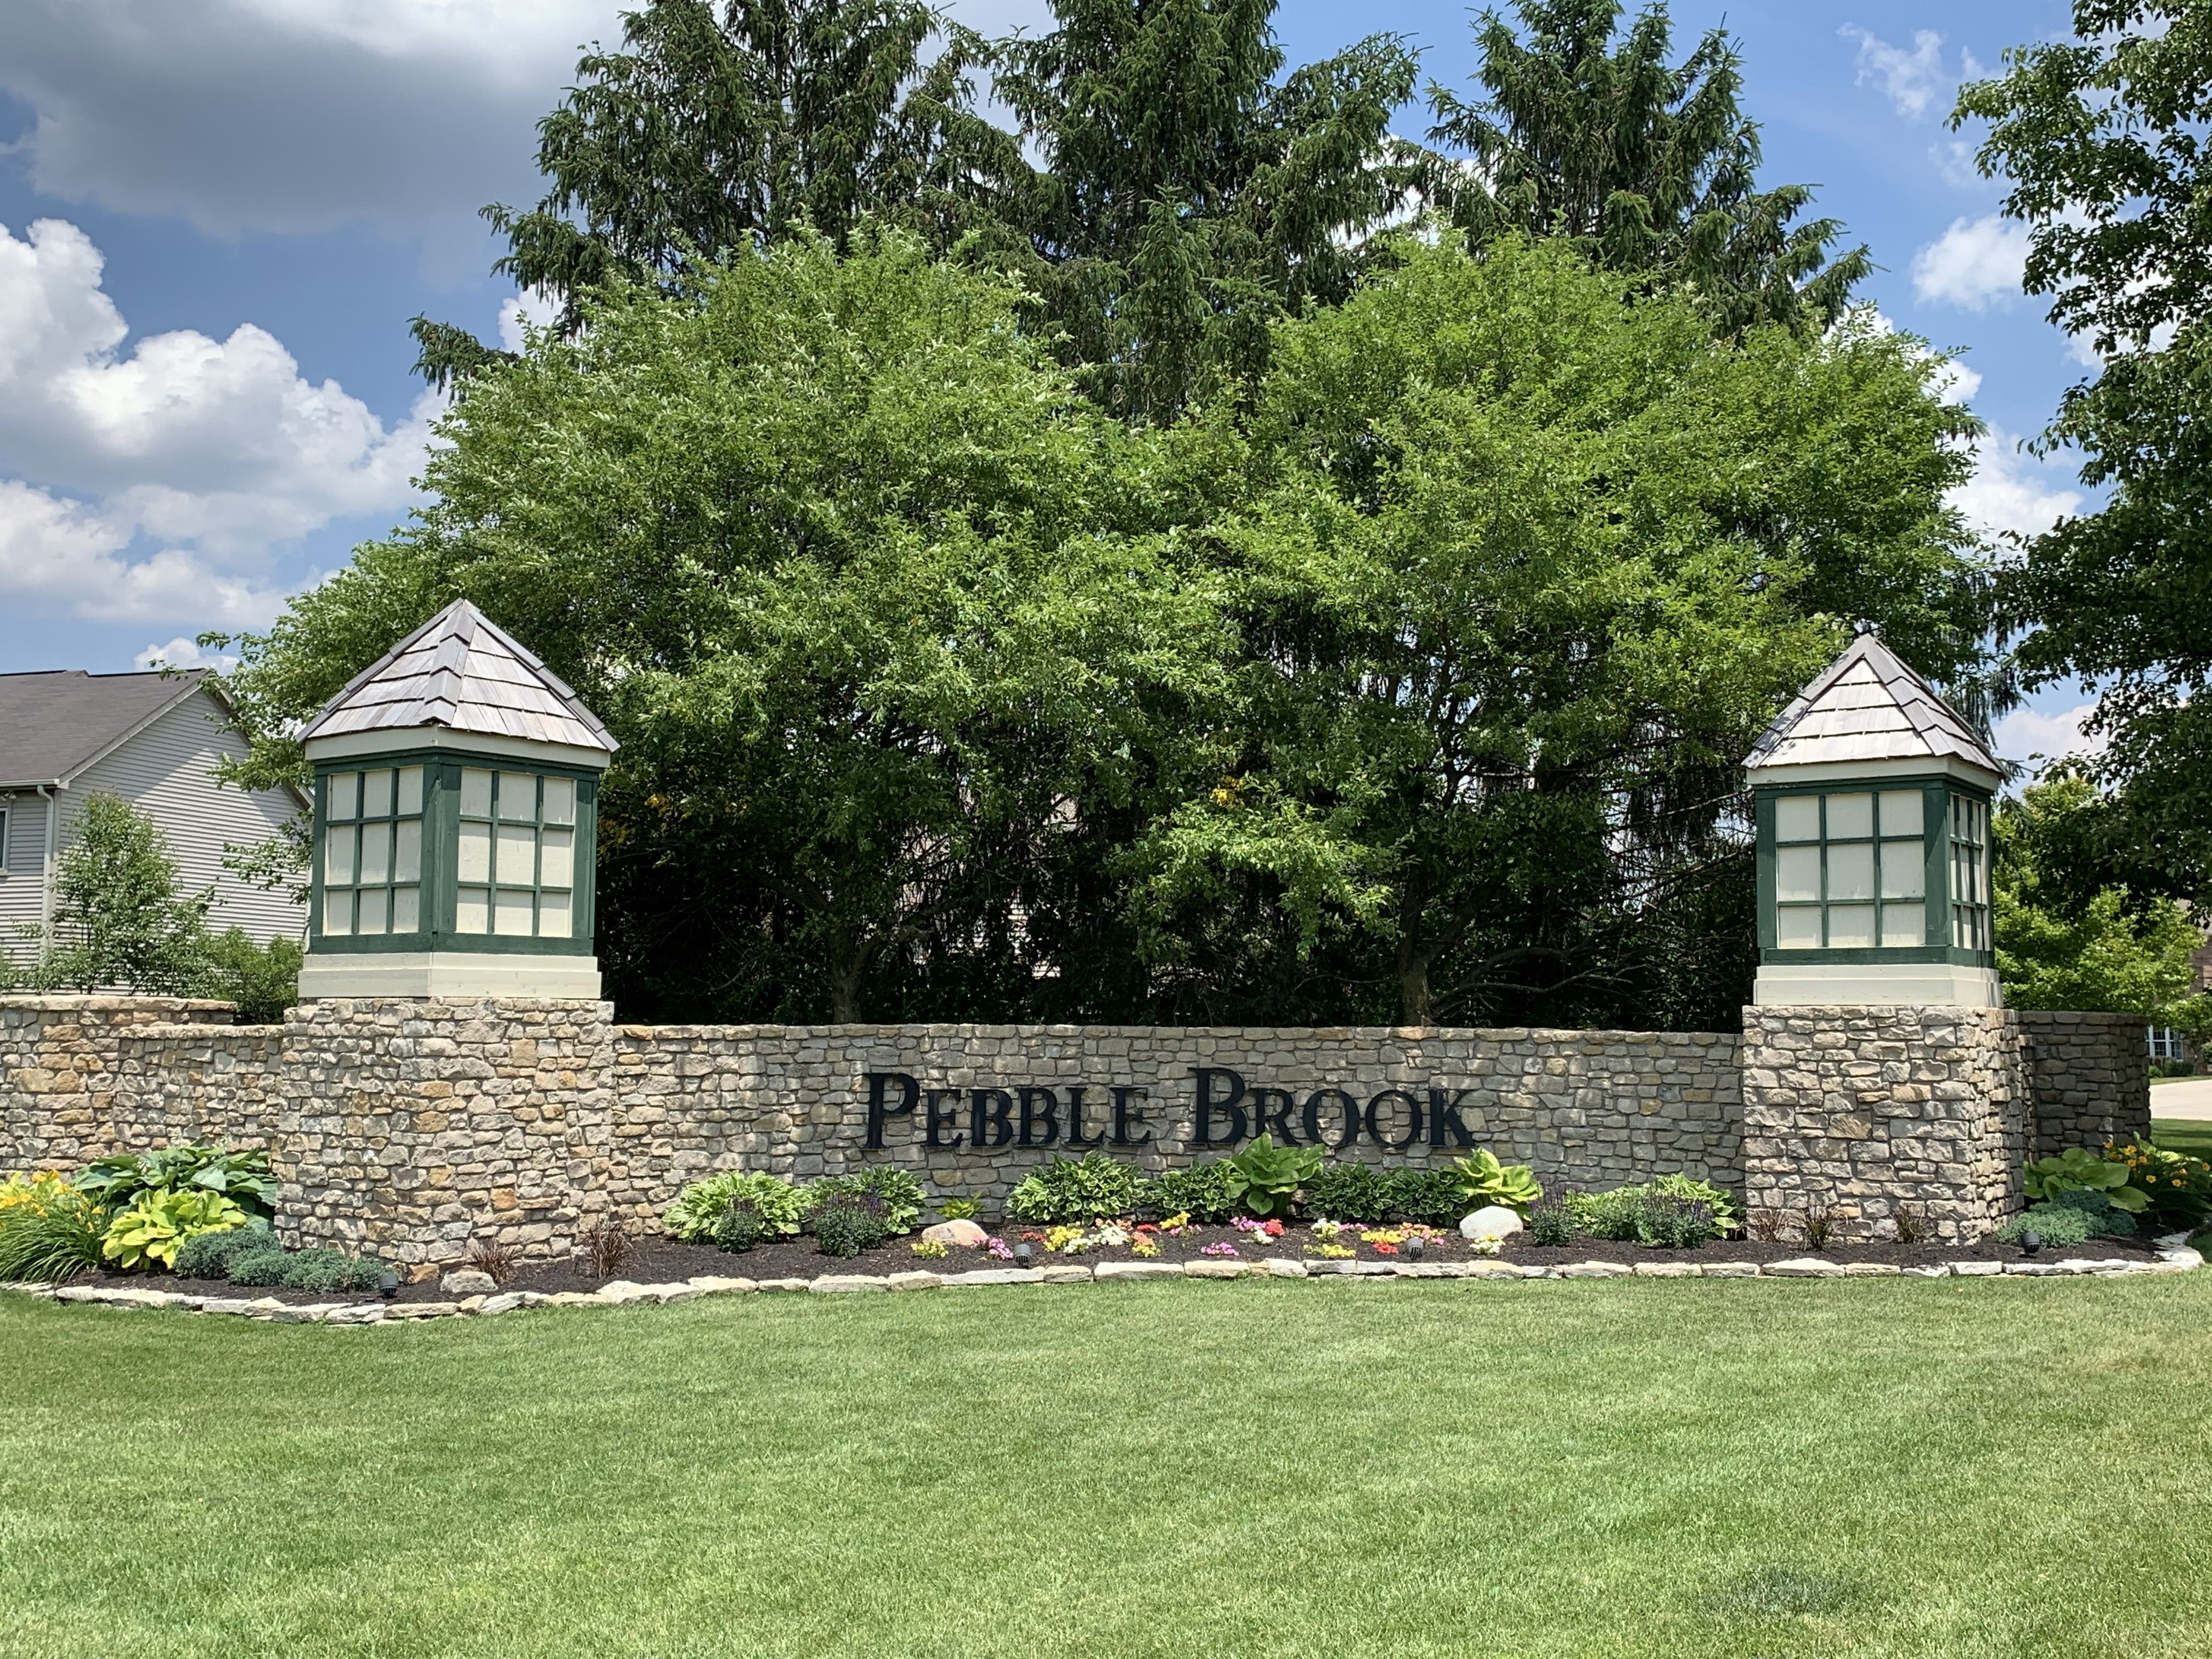 The Villages At Pebble Brook